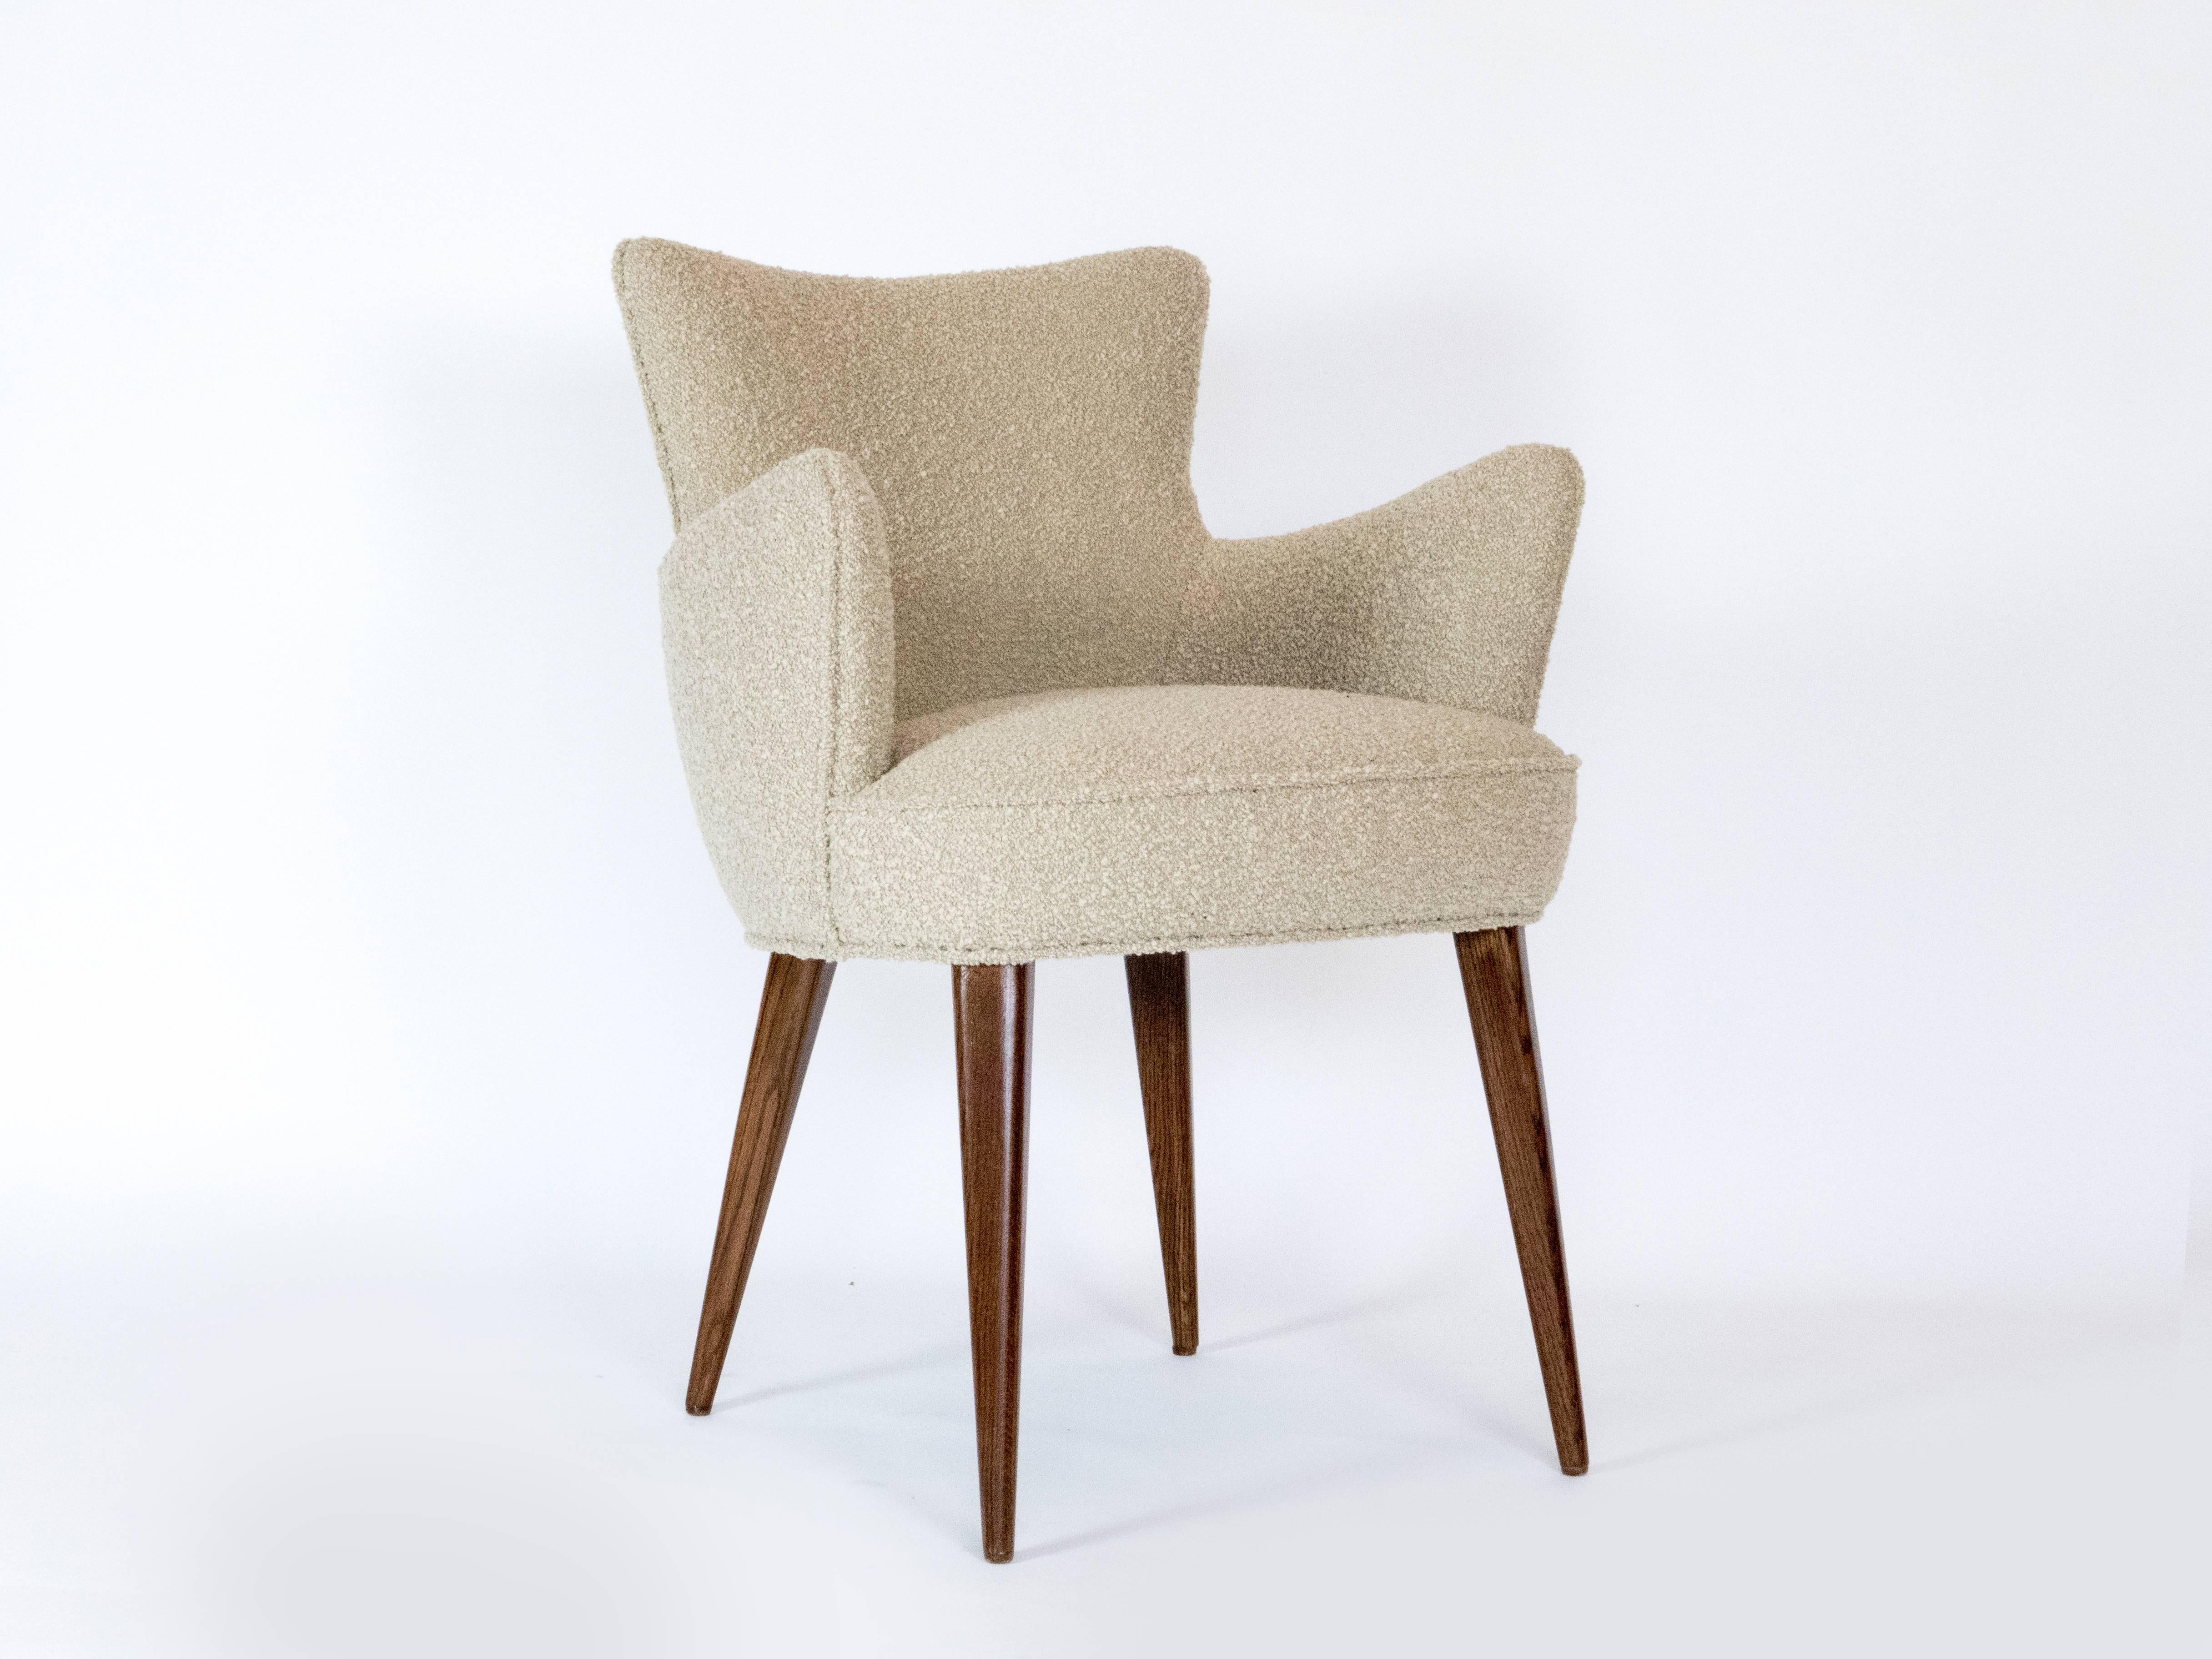 This stylish chair can stand alone as a side chair or is perfect in the dining room. It has modern lines, but the oak legs will sit well with any wood furnishings. The curved frame hugs you comfortably with the armrest being at a perfect height.